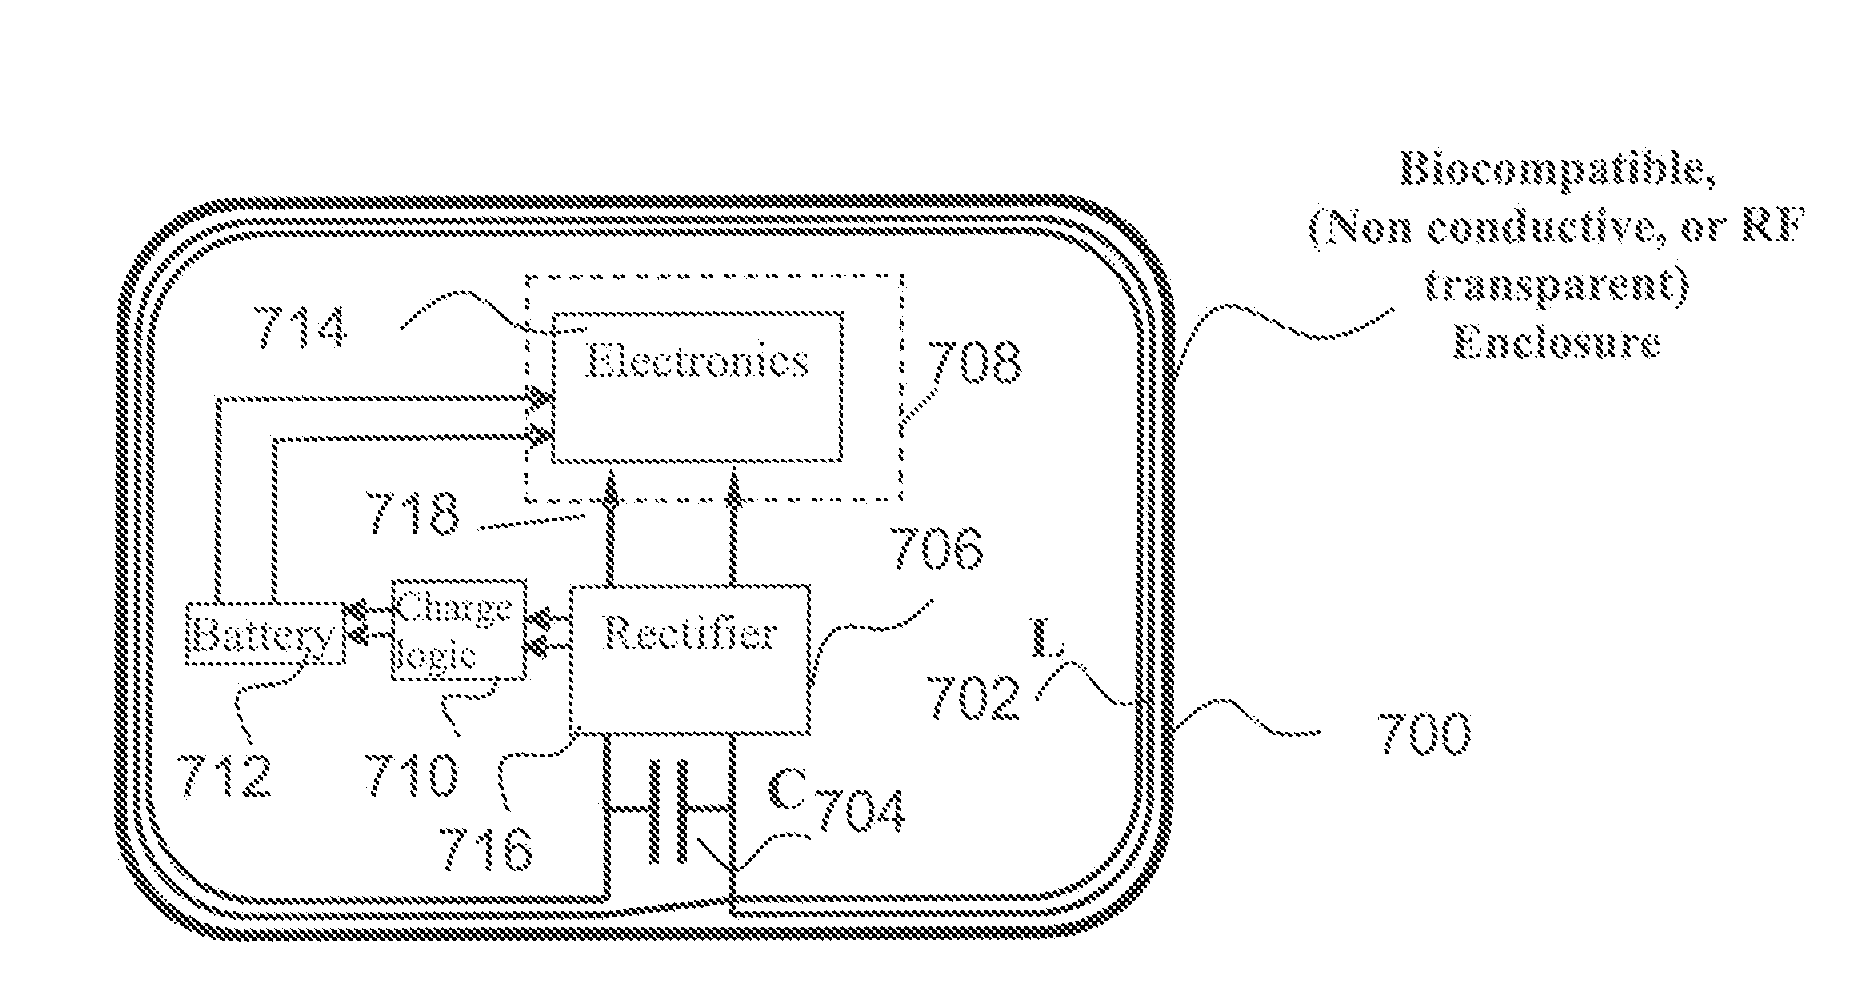 MRI compatible implanted electronic medical device with power and data communication capability